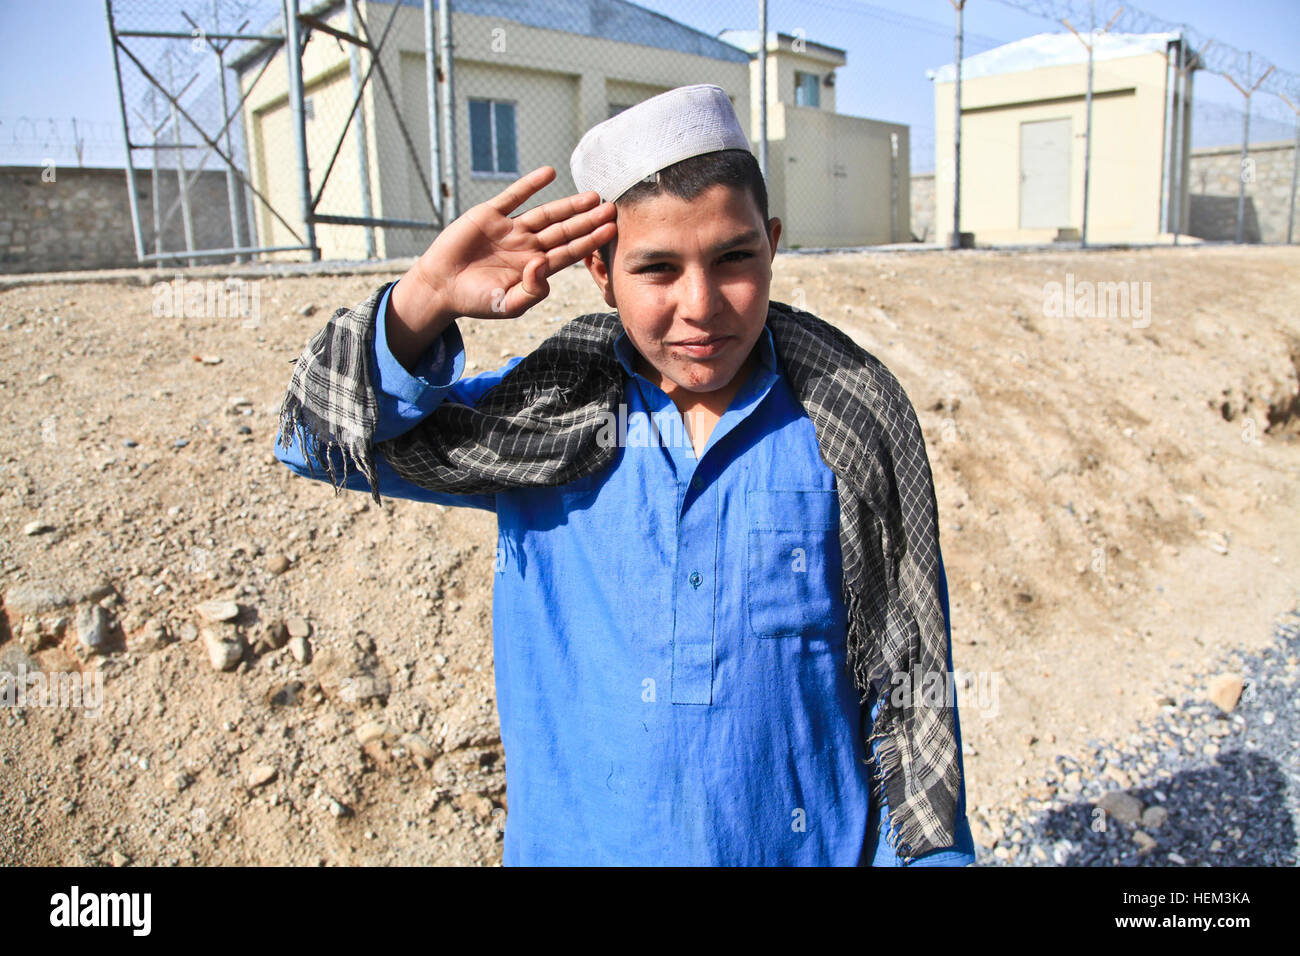 A local Afghan boy salutes U.S. soldiers within an Afghan Border Police compound, Nazyan district, Nangarhar province, Afghanistan, March 15, 2012. The purpose of the mission was to gain familiarization of the district and key leadership. Key leader engagement 120315-A-LP603-002 Stock Photo